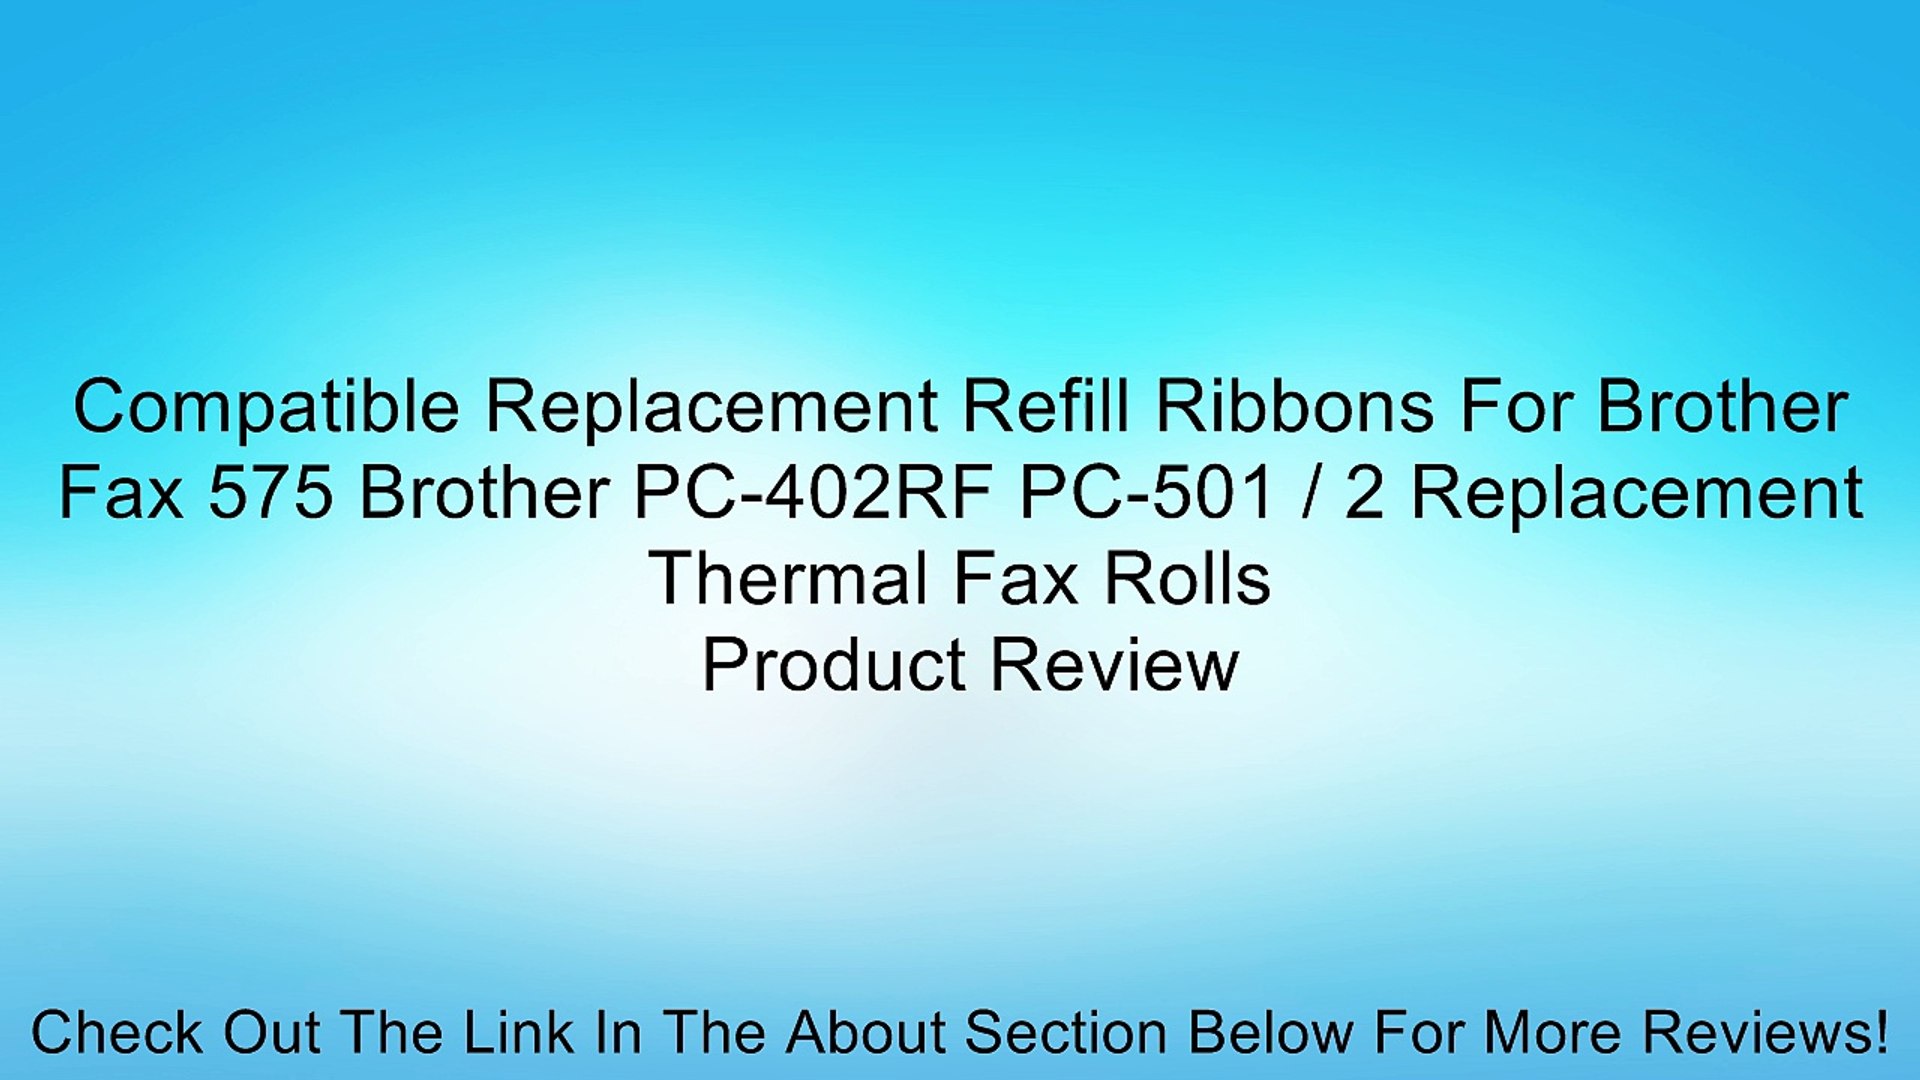 Compatible Replacement Refill Ribbons For Brother Fax 575 Brother Pc 402rf Pc 501 2 Replacement Thermal Fax Rolls Review Video Dailymotion